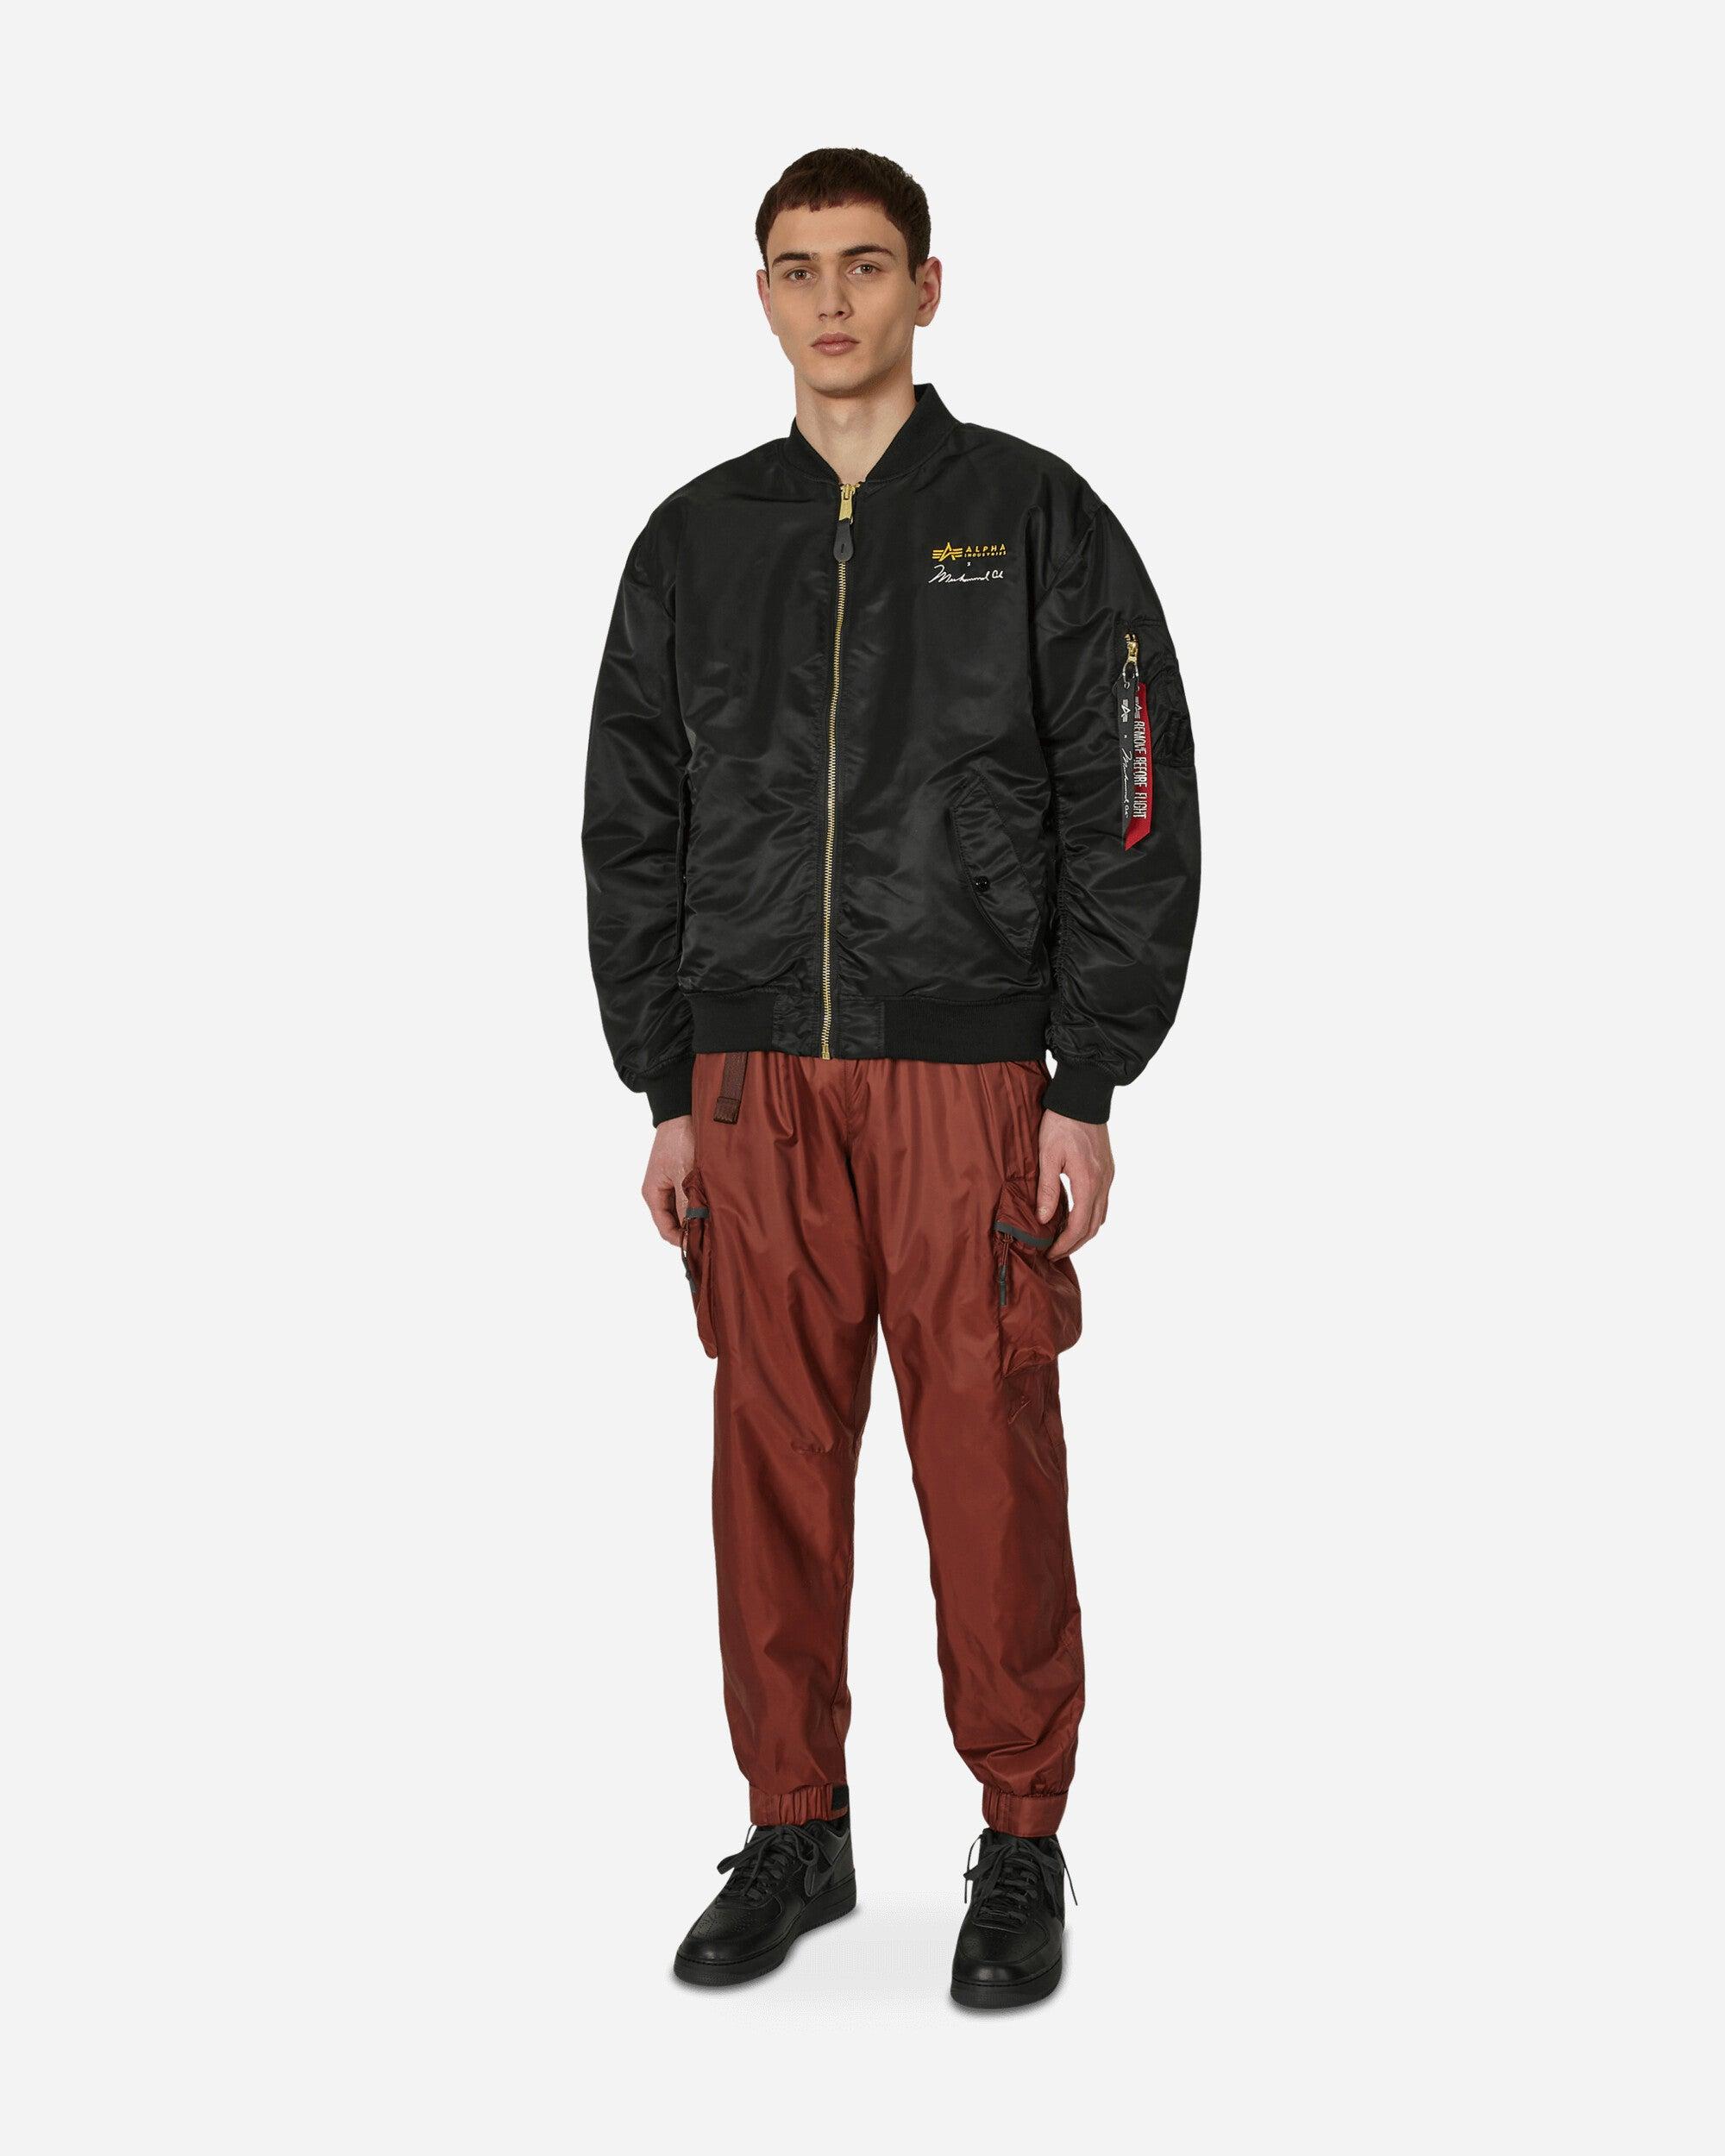 F.O.G. Collection One Bomber Jacket MA-1